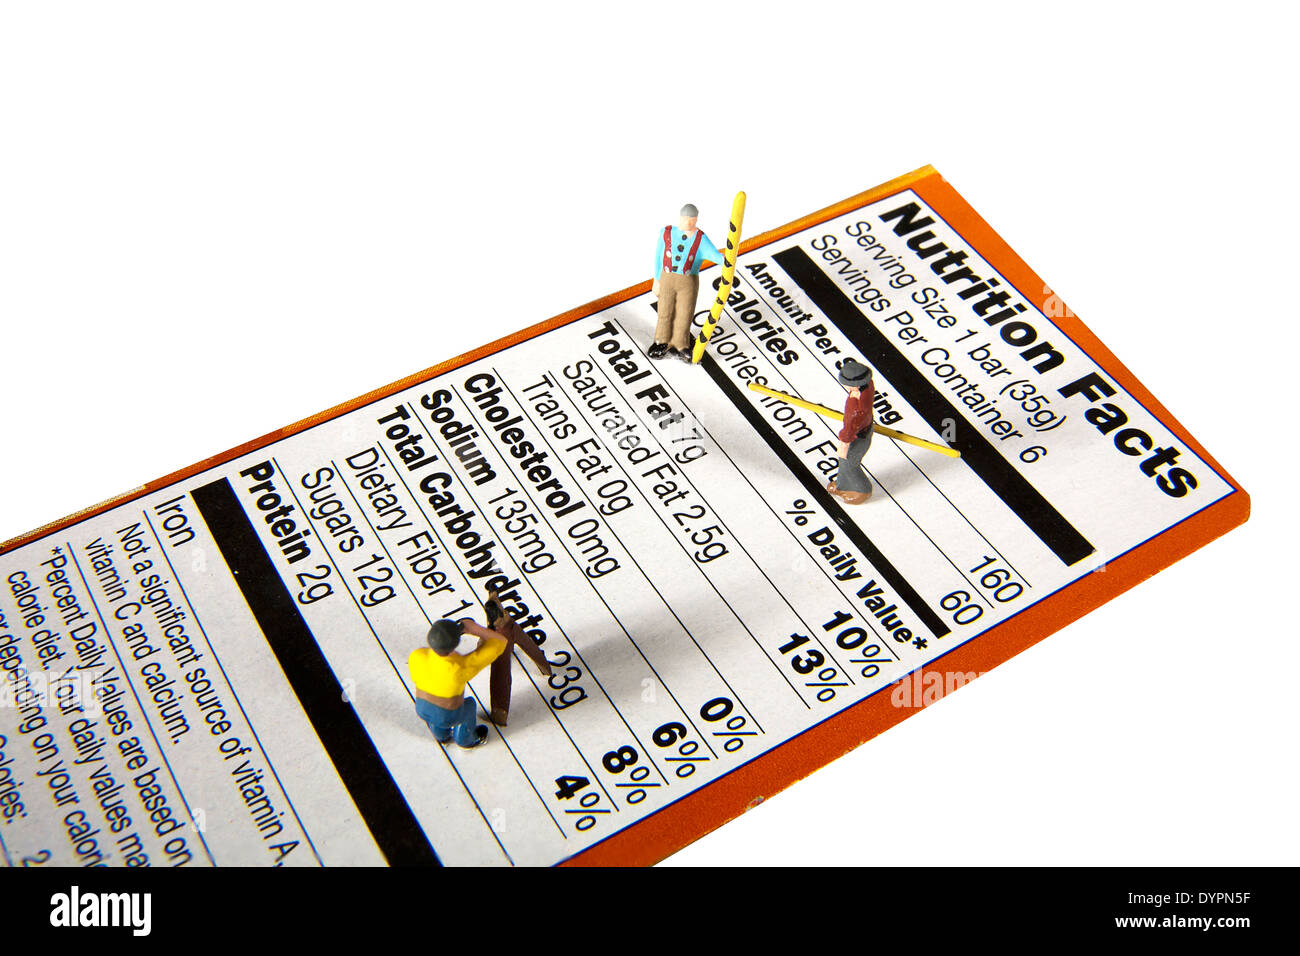 Figurines of a survey team on a nutrition label. Stock Photo